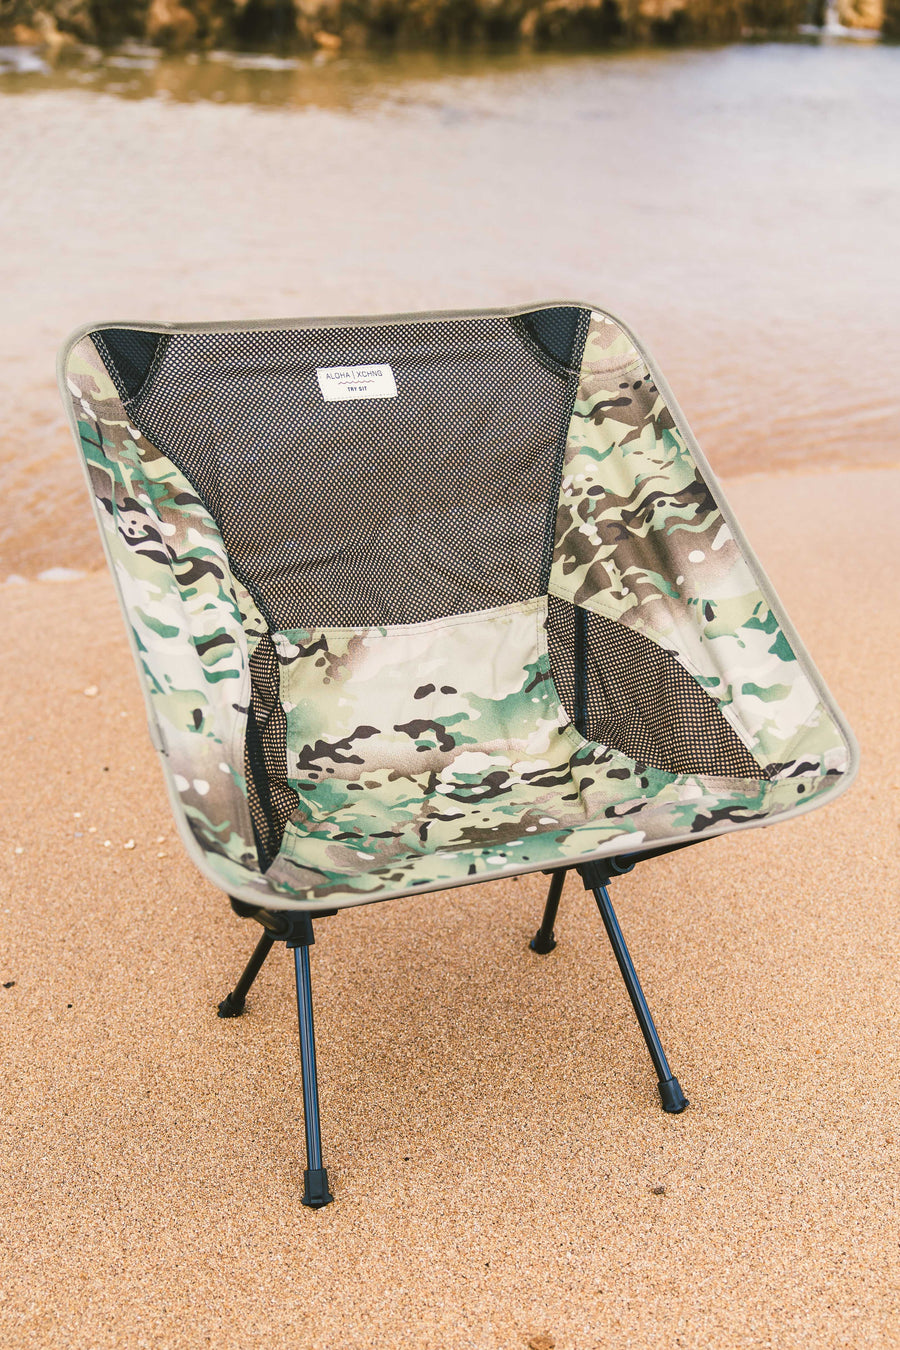 Try Sit Camp Chair